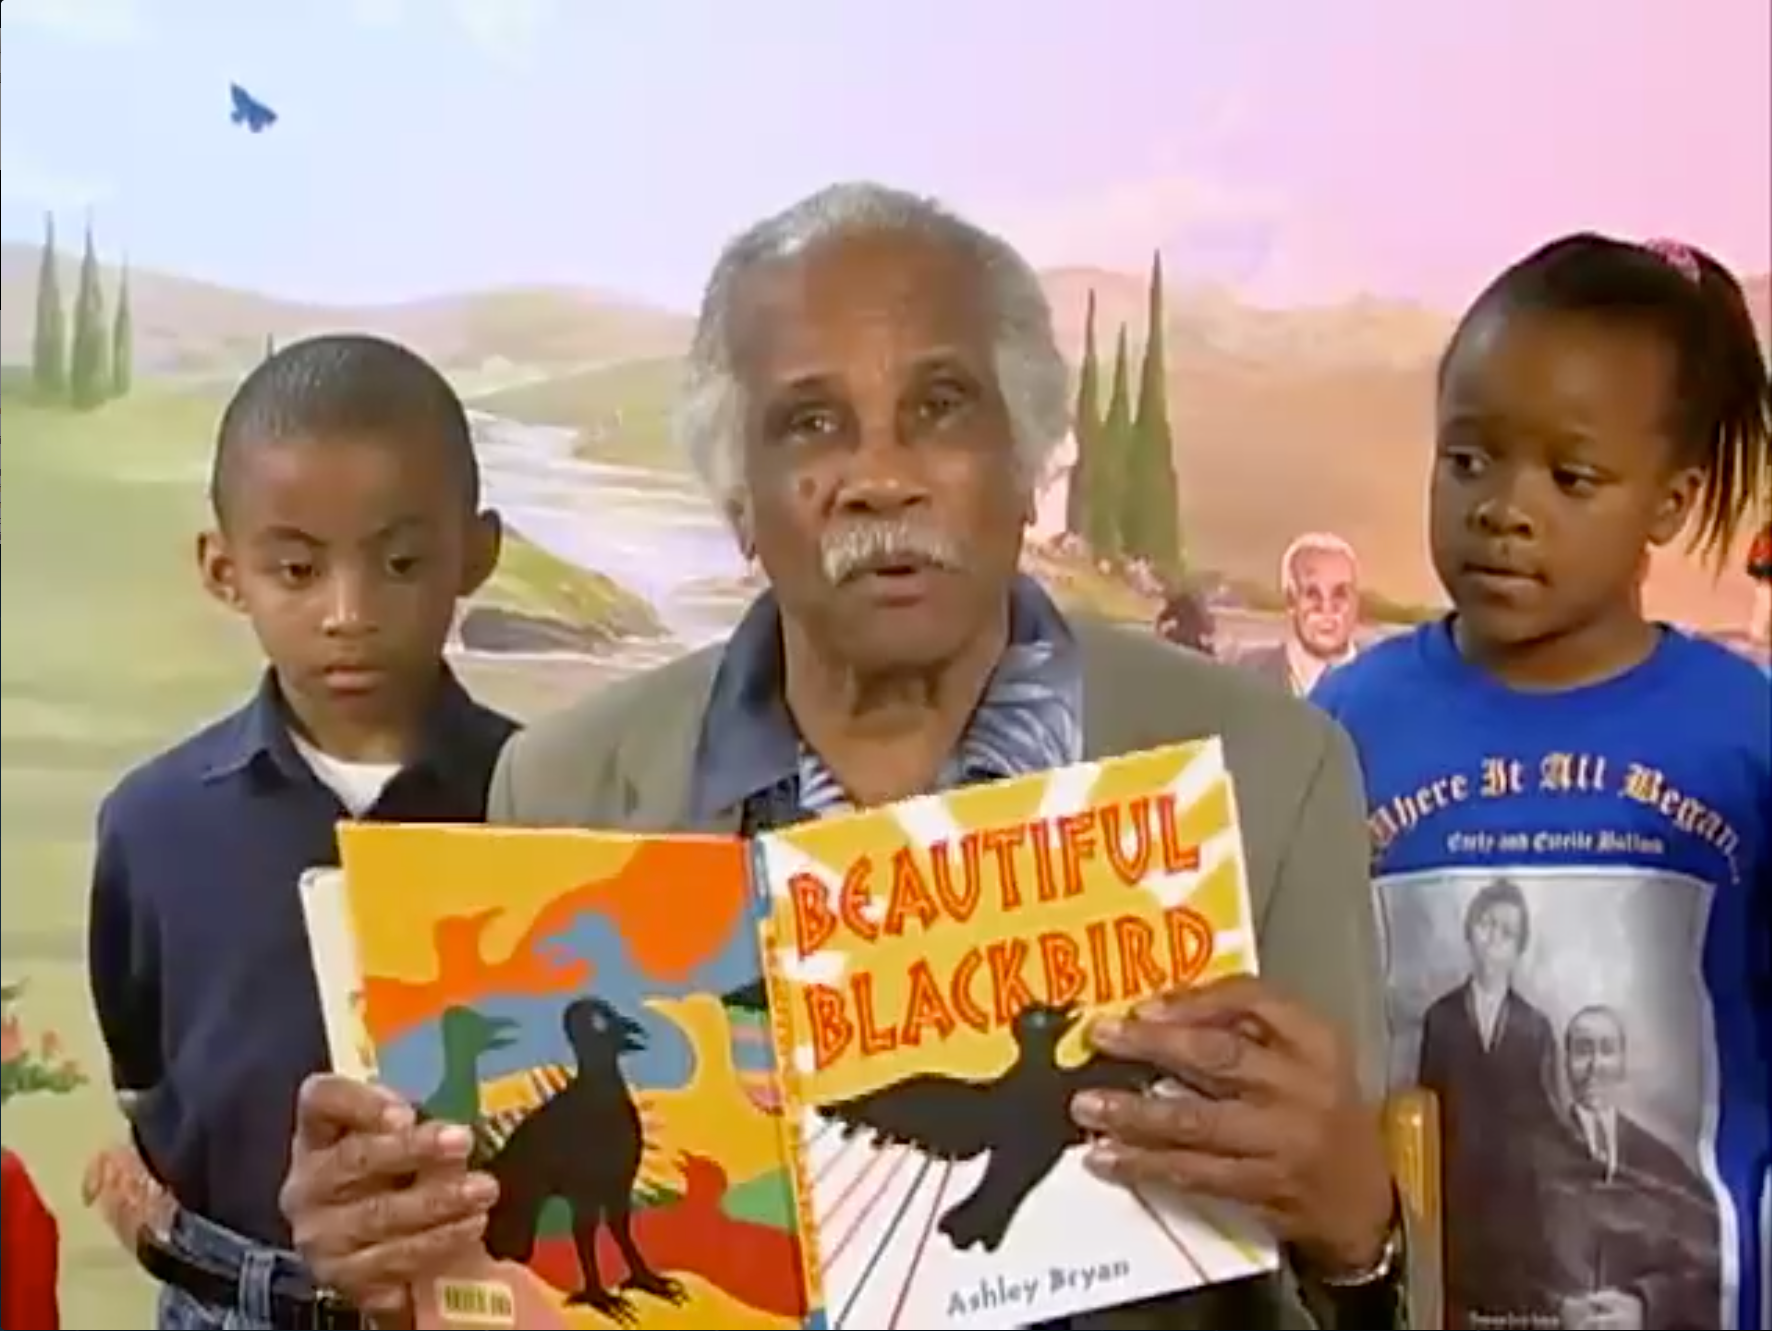 A man with two children reading a book.